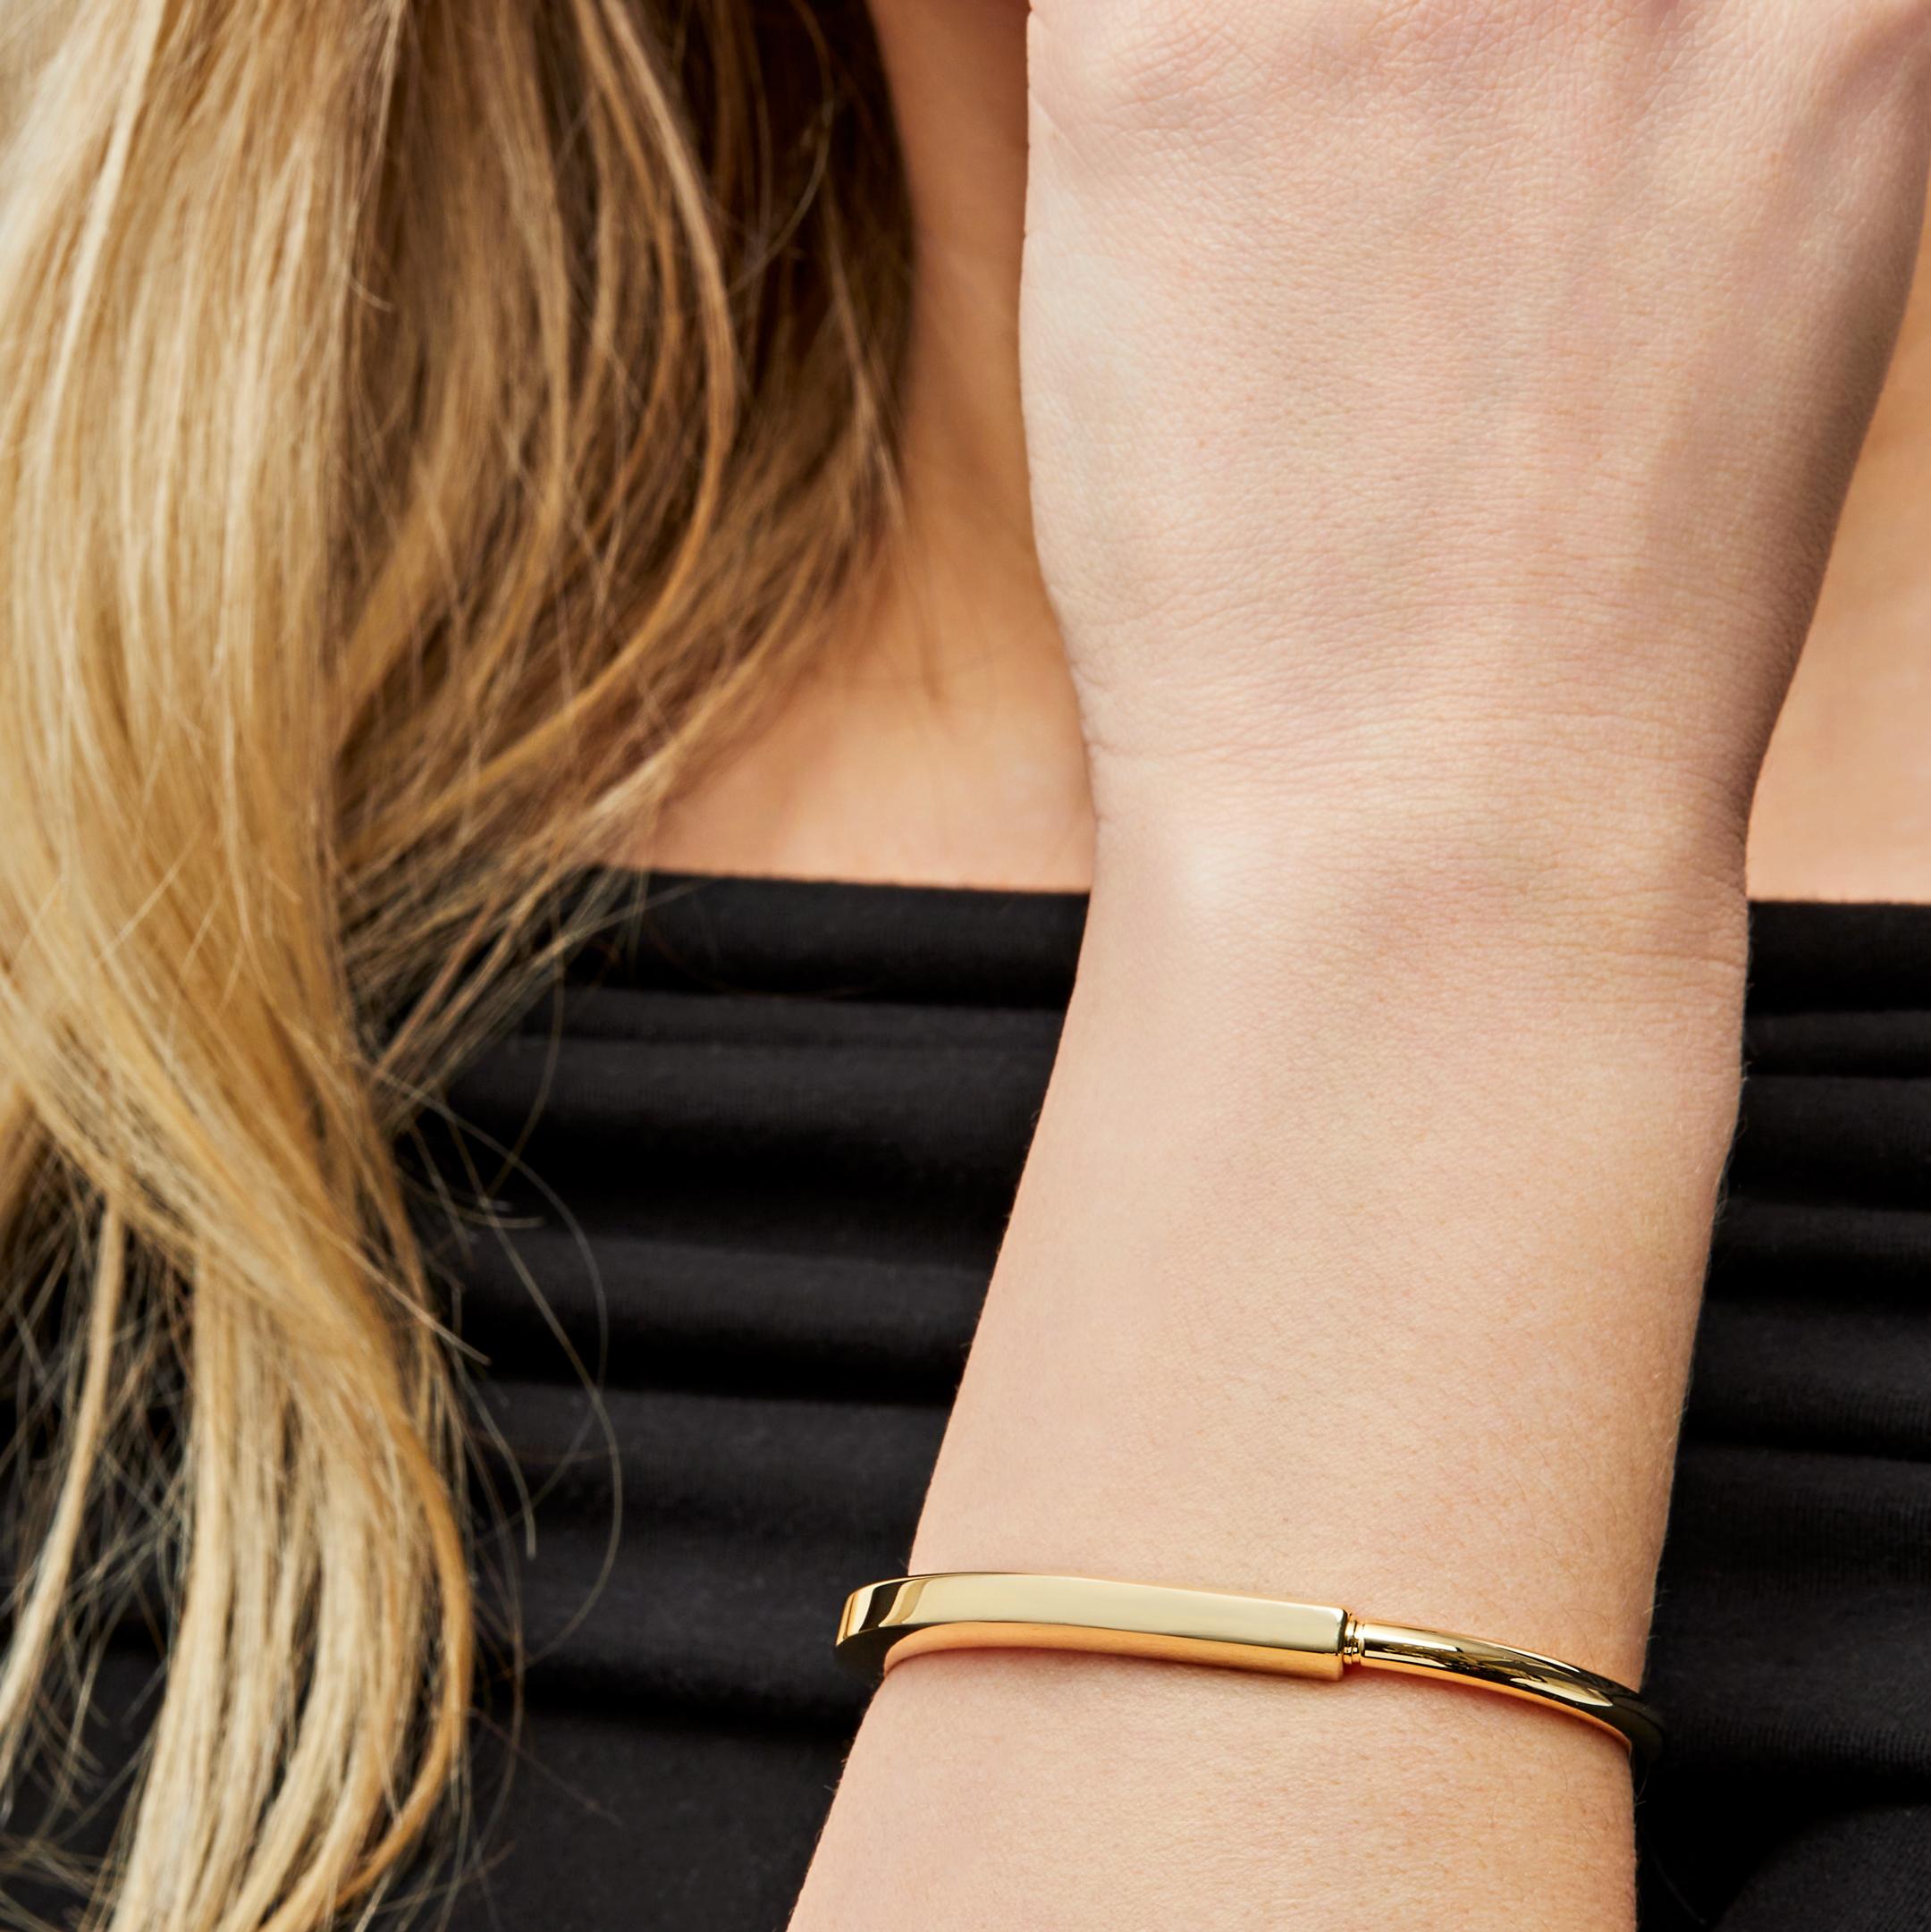 Designed to be worn by all genders, The Tiffany & Co Lock Bangle is a bold visual statement about the personal bonds. Crafted in 18-karat gold, the Tiffany Lock bangle features an innovative clasp a nod to Tiffany's history. 

Elevate your style